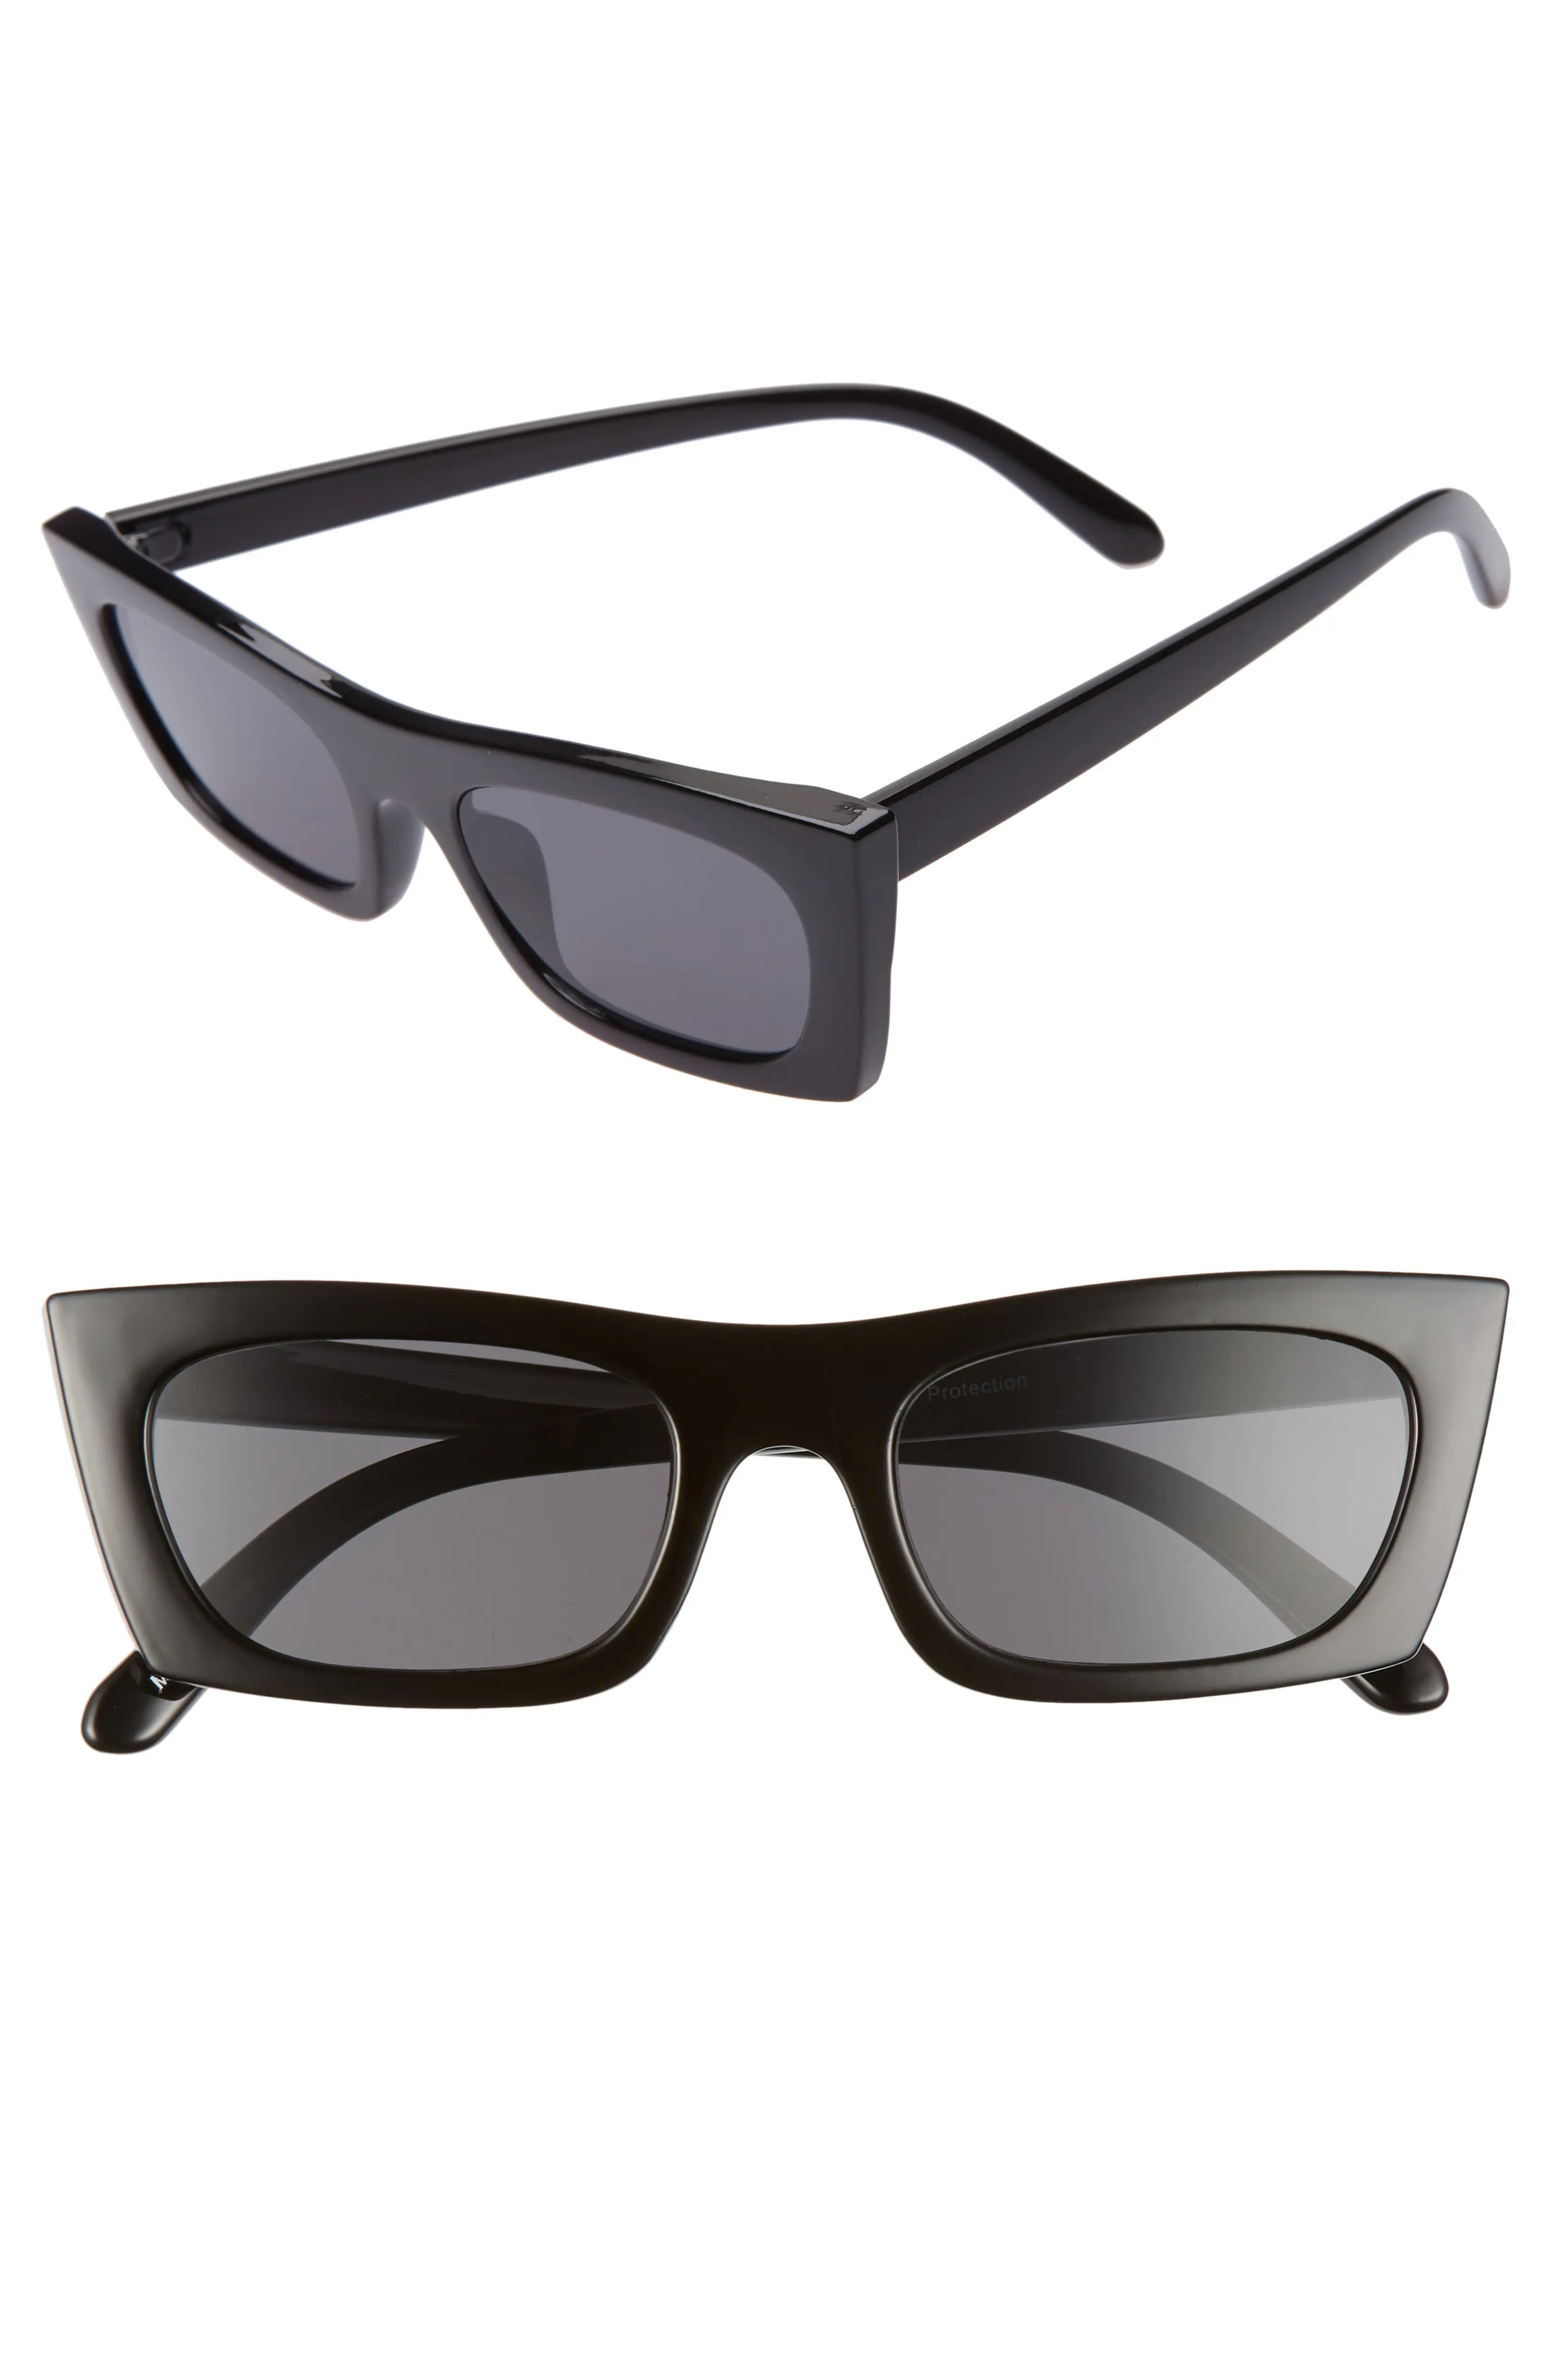 These rectangular sunnies flick out into sharp corners for a subtle feline shape. | Nordstrom